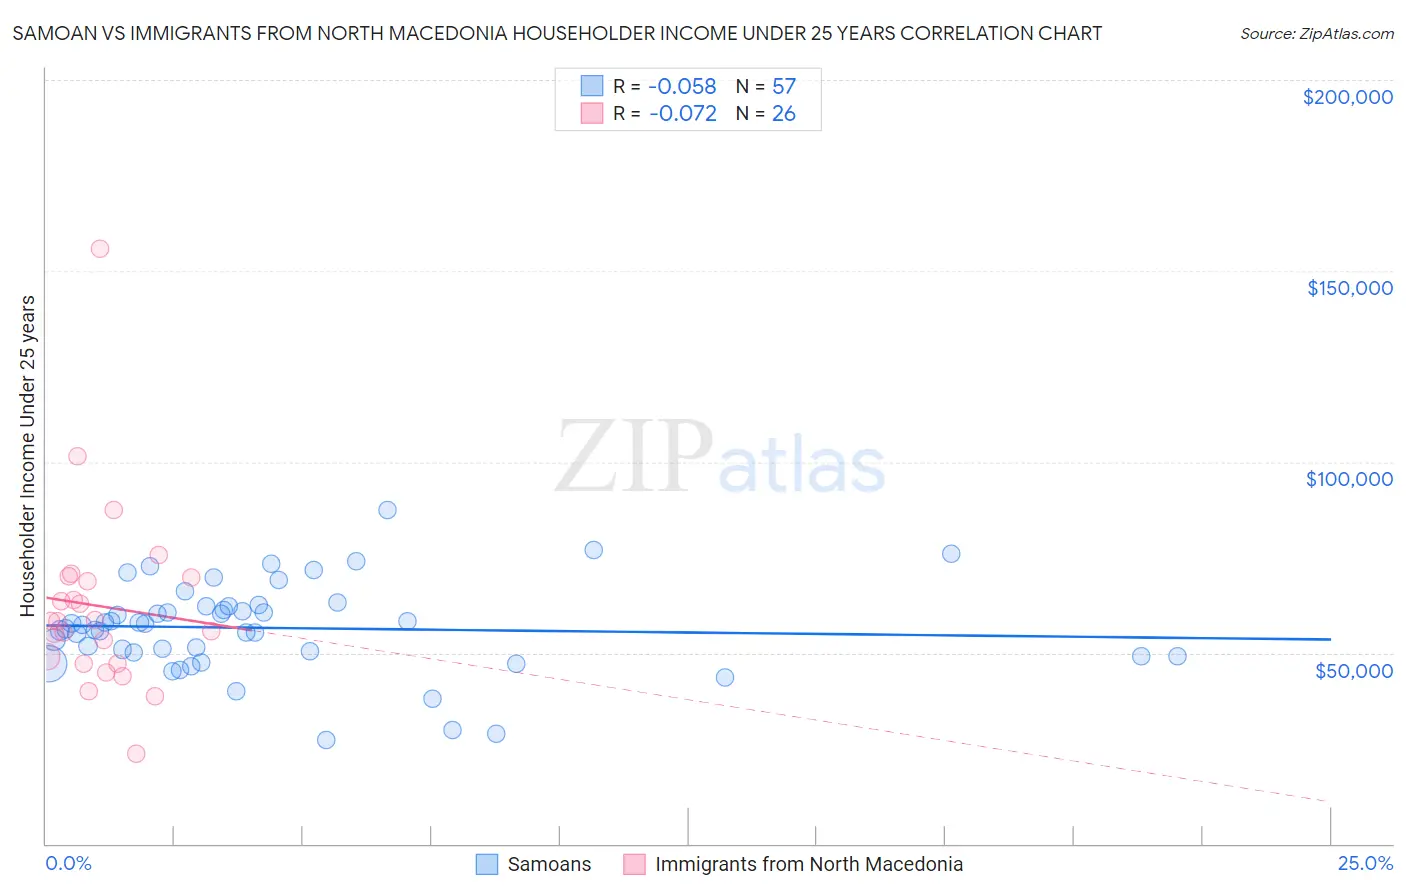 Samoan vs Immigrants from North Macedonia Householder Income Under 25 years